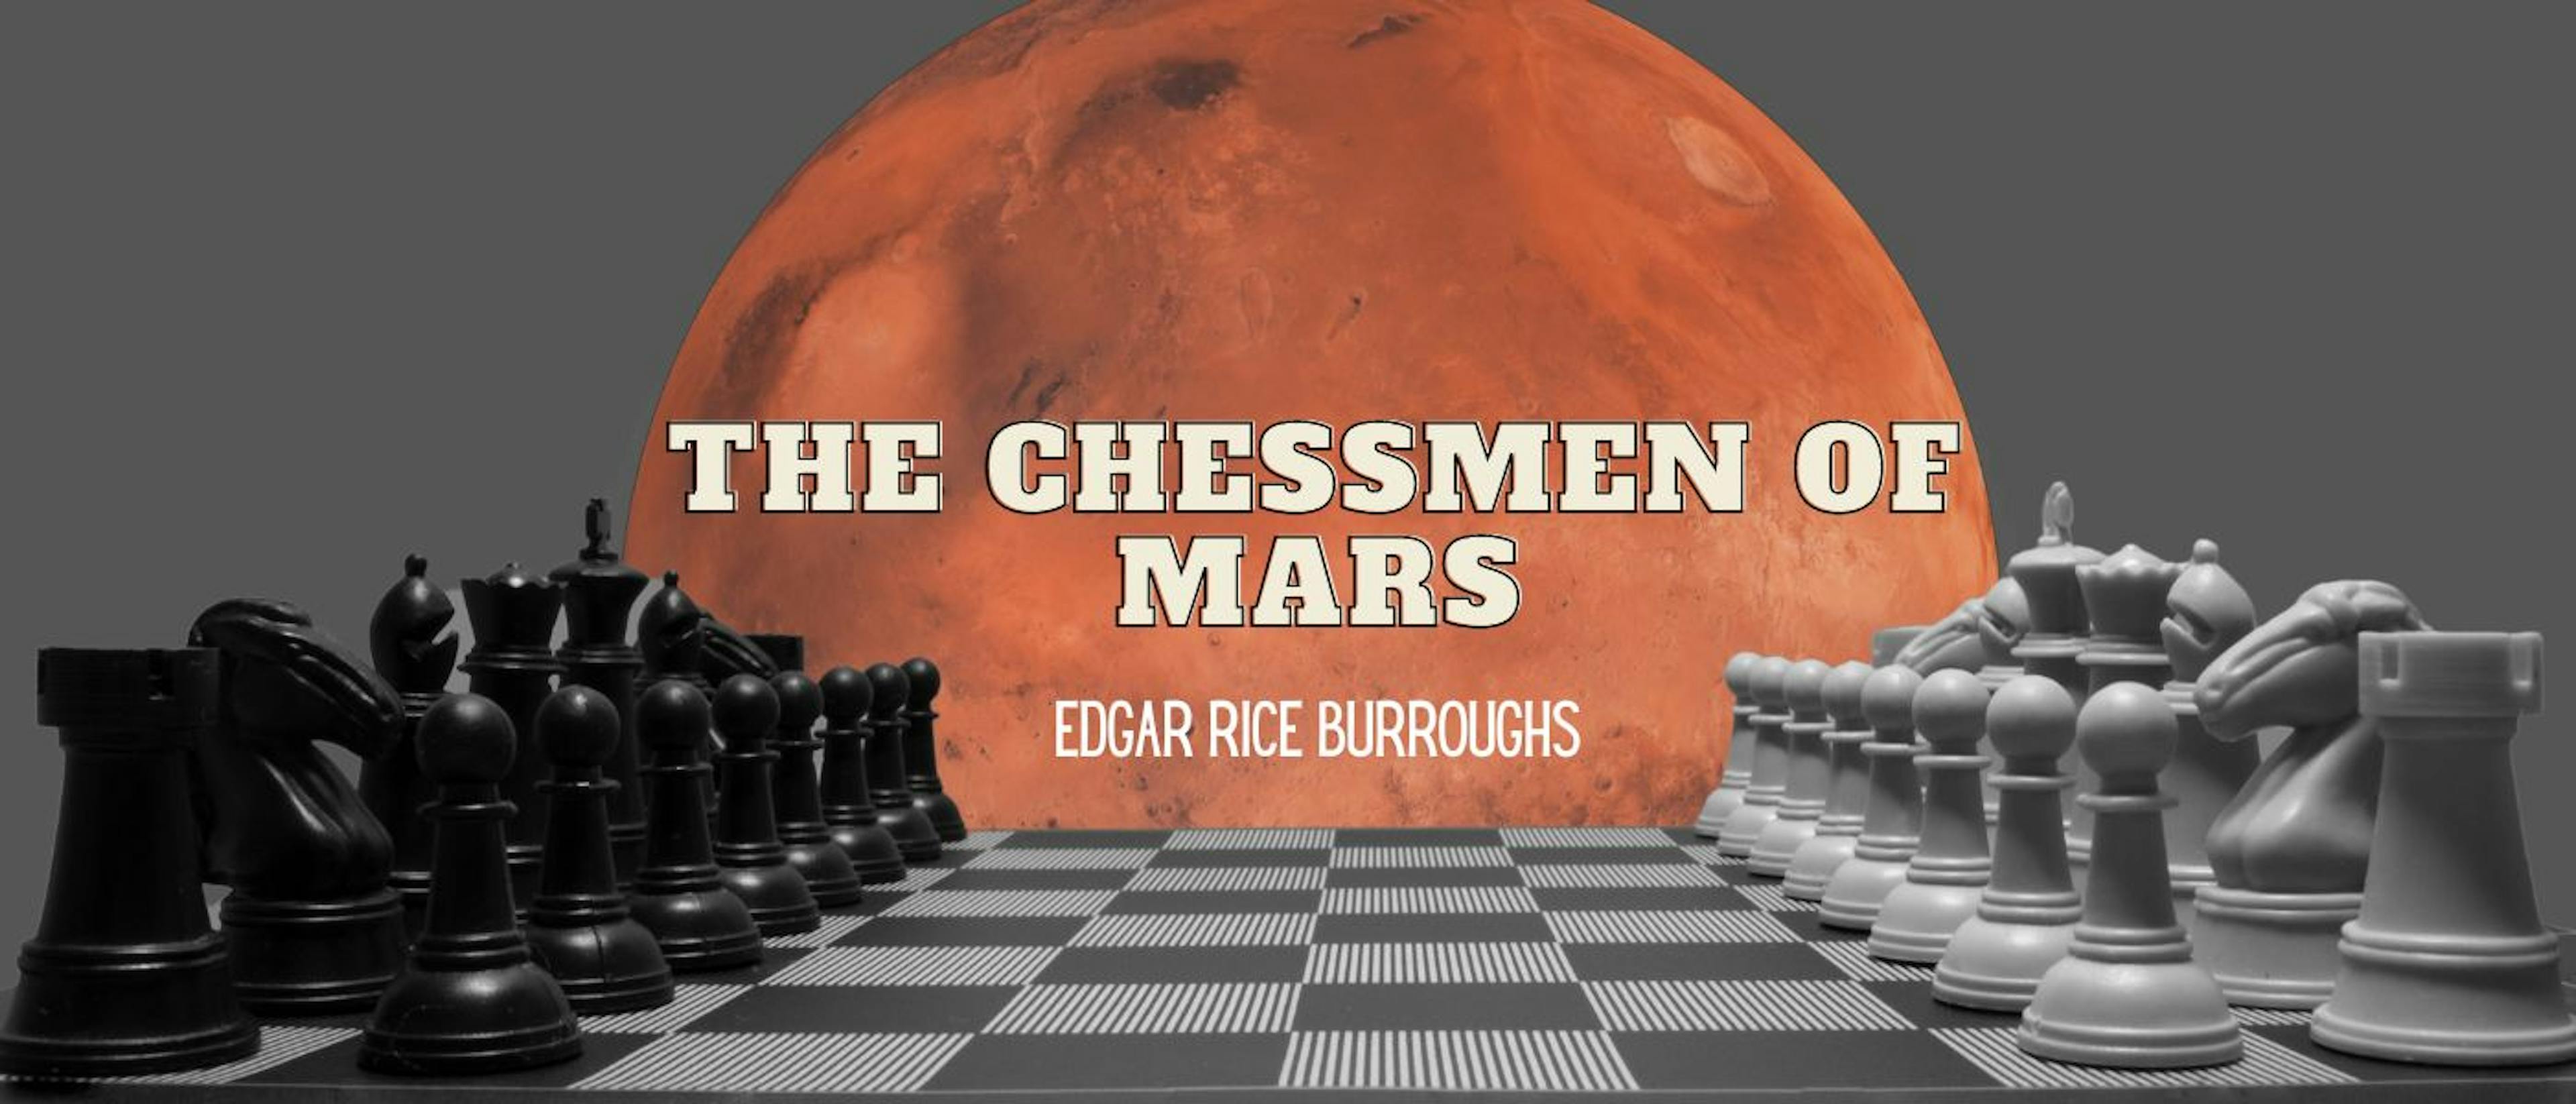 featured image - The Chessmen of Mars by Edgar Rice Burroughs - Table of Links